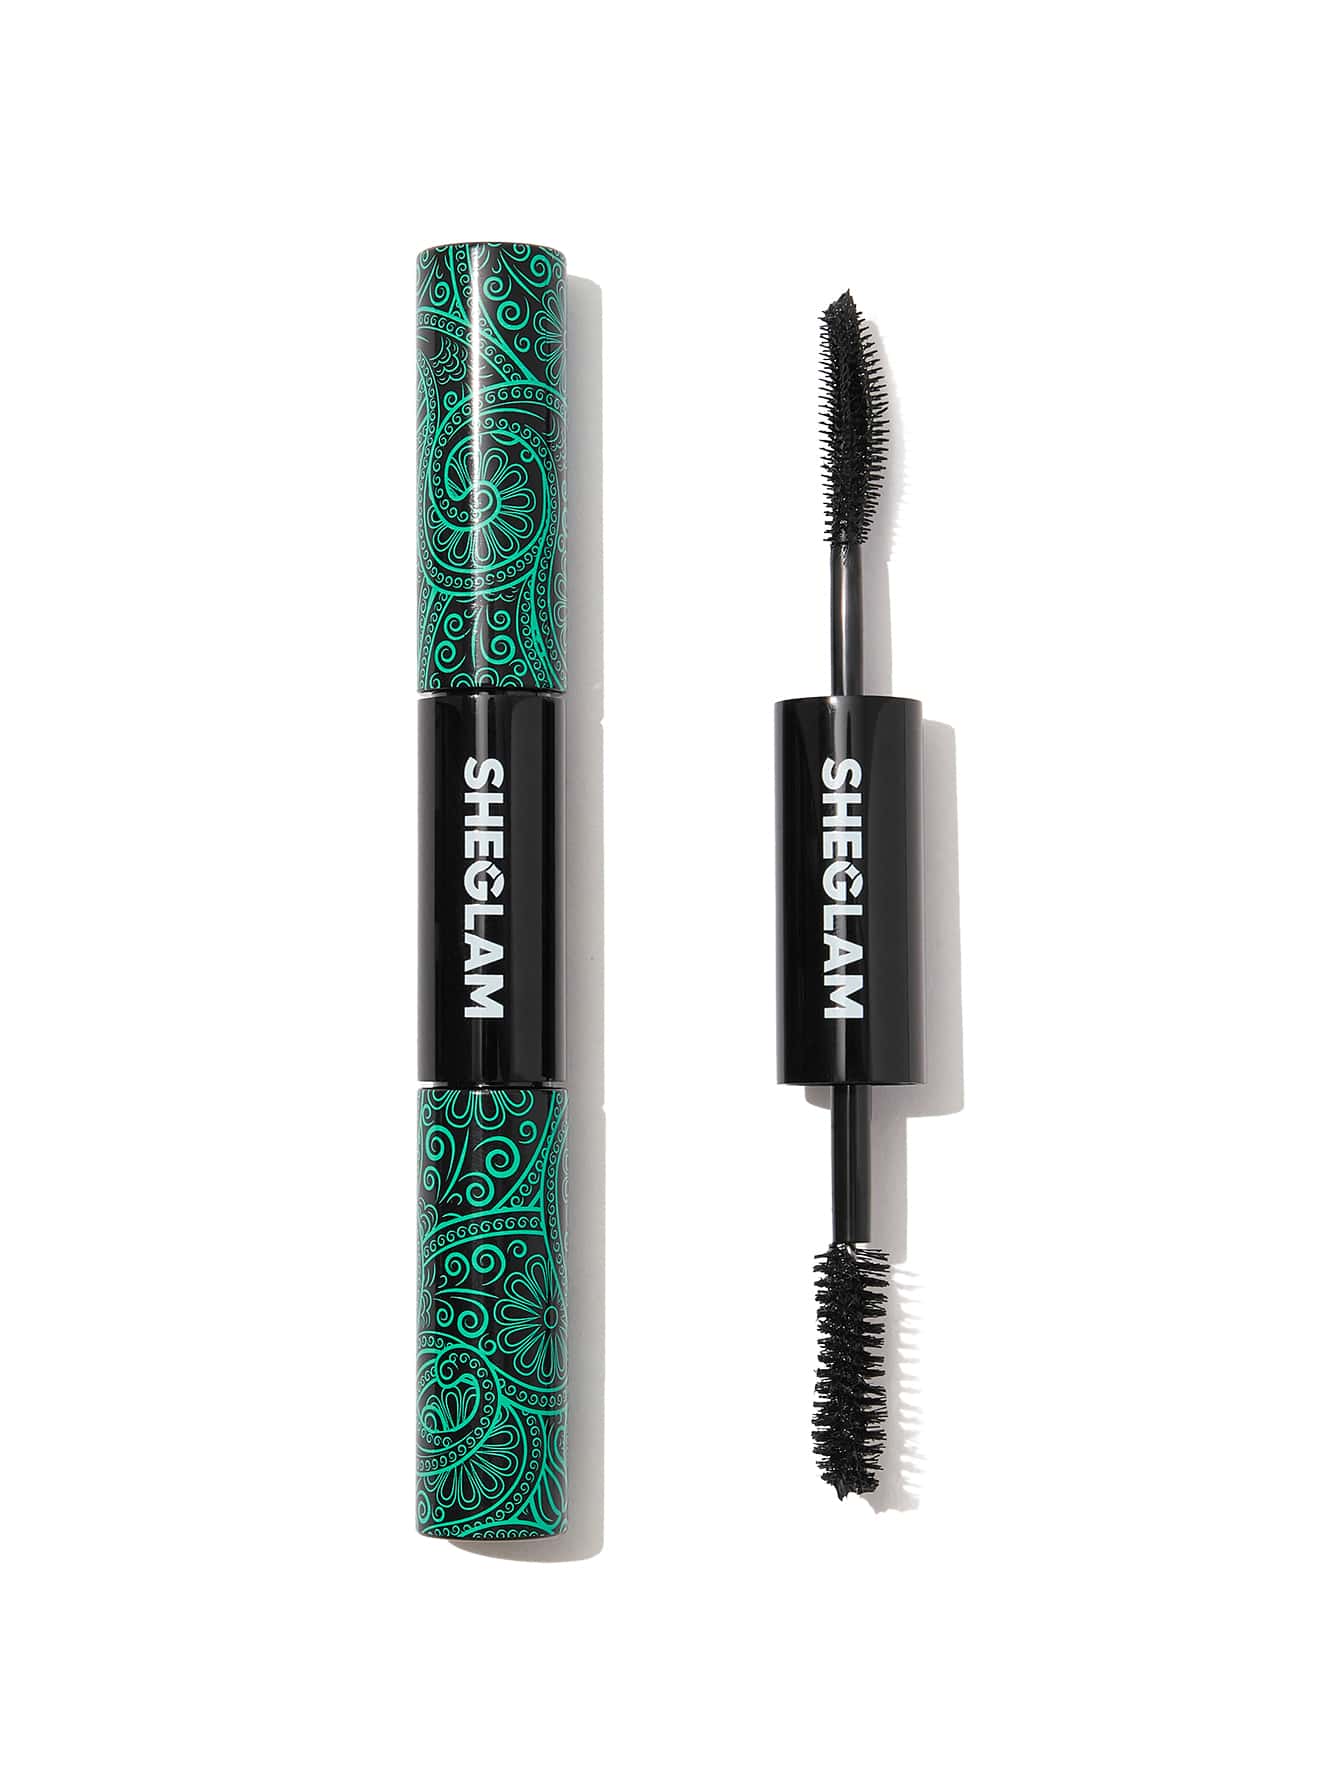 Sheglam All-in-One Volume and Length Mascara